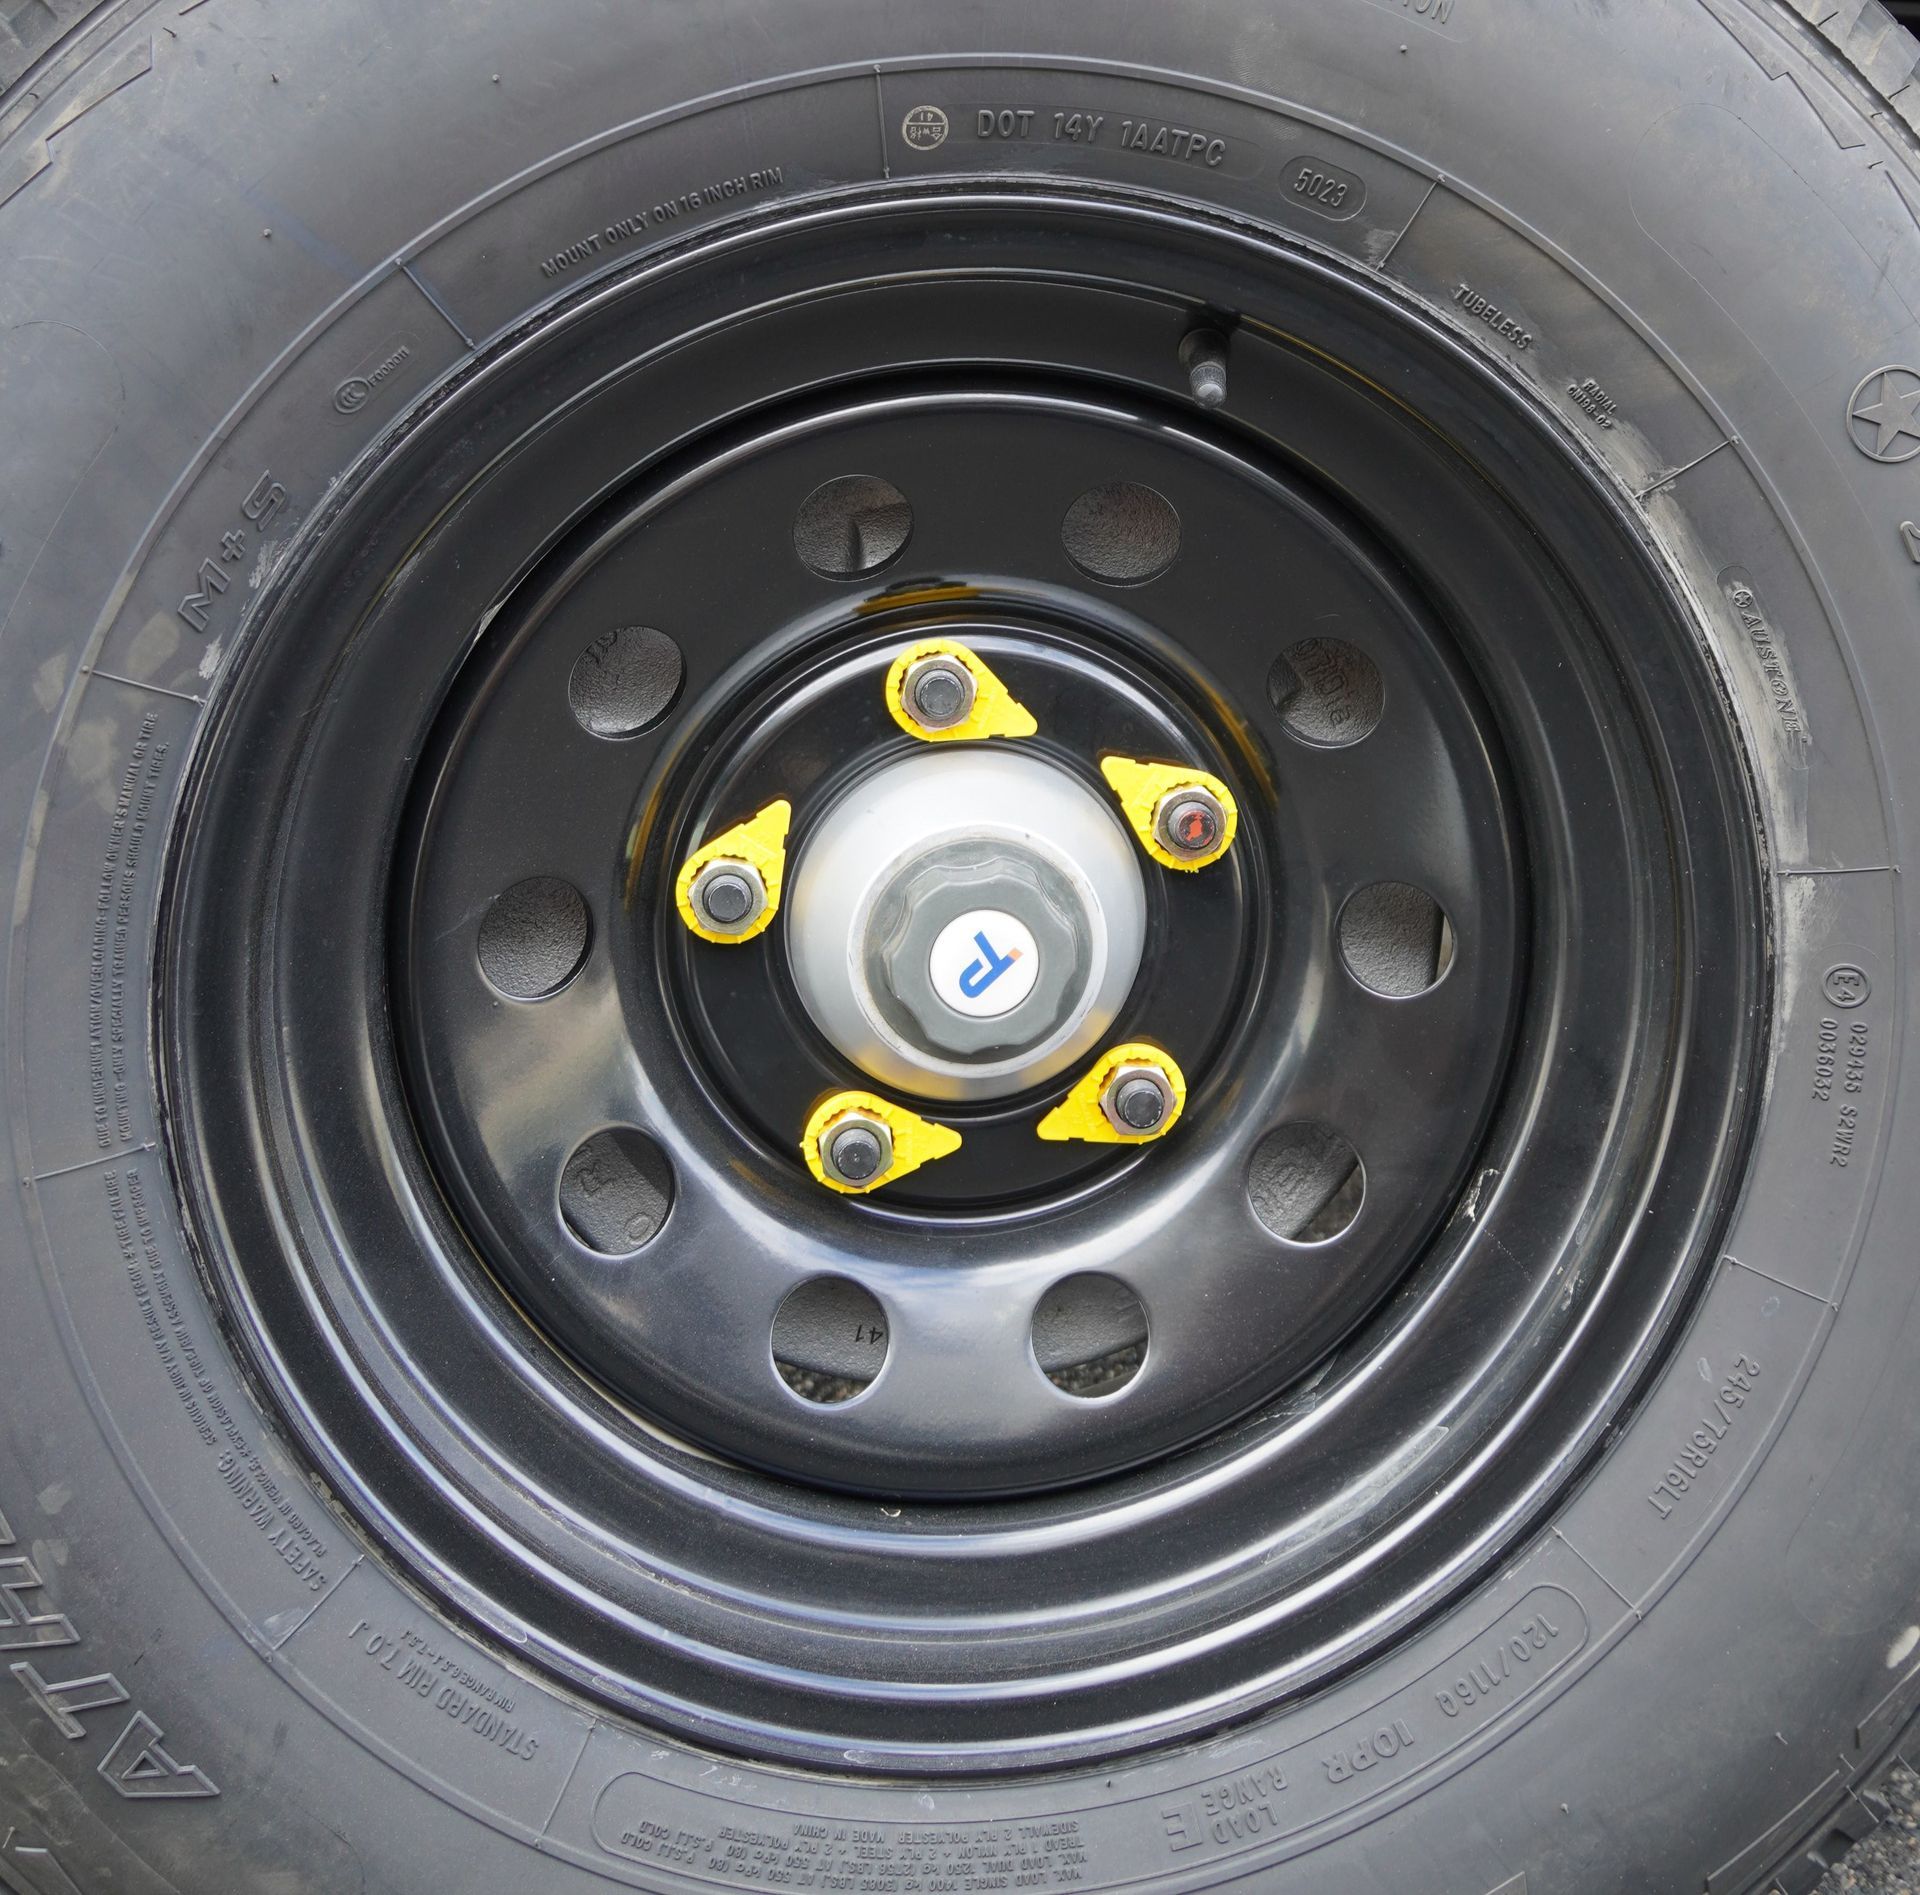 The 12-inch electric drum brake visible through the wheel rim of an Ox Trailer tyre on a Service Trailer